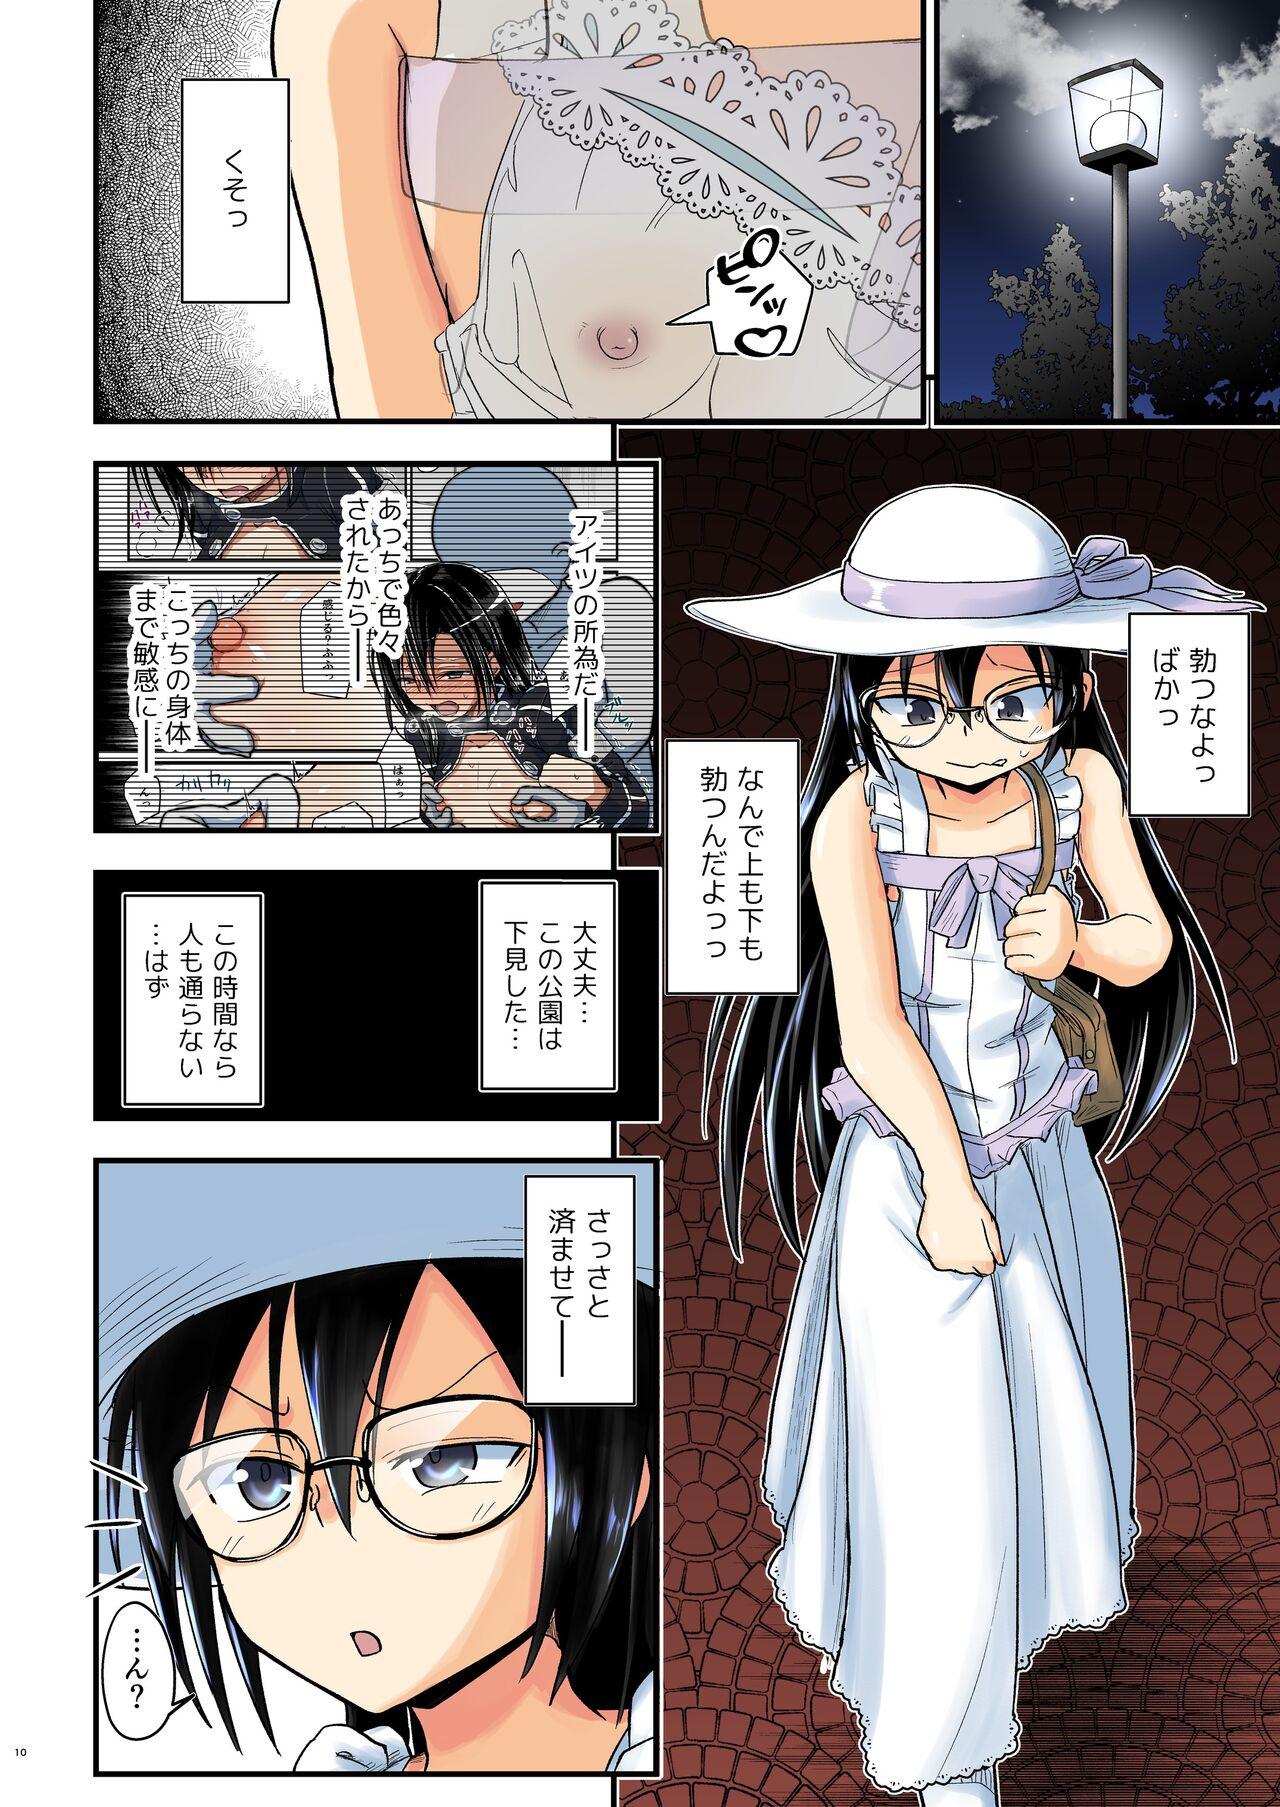 Ass Licking Kiriko Route Another #07 - Sword art online Oral Sex - Page 10